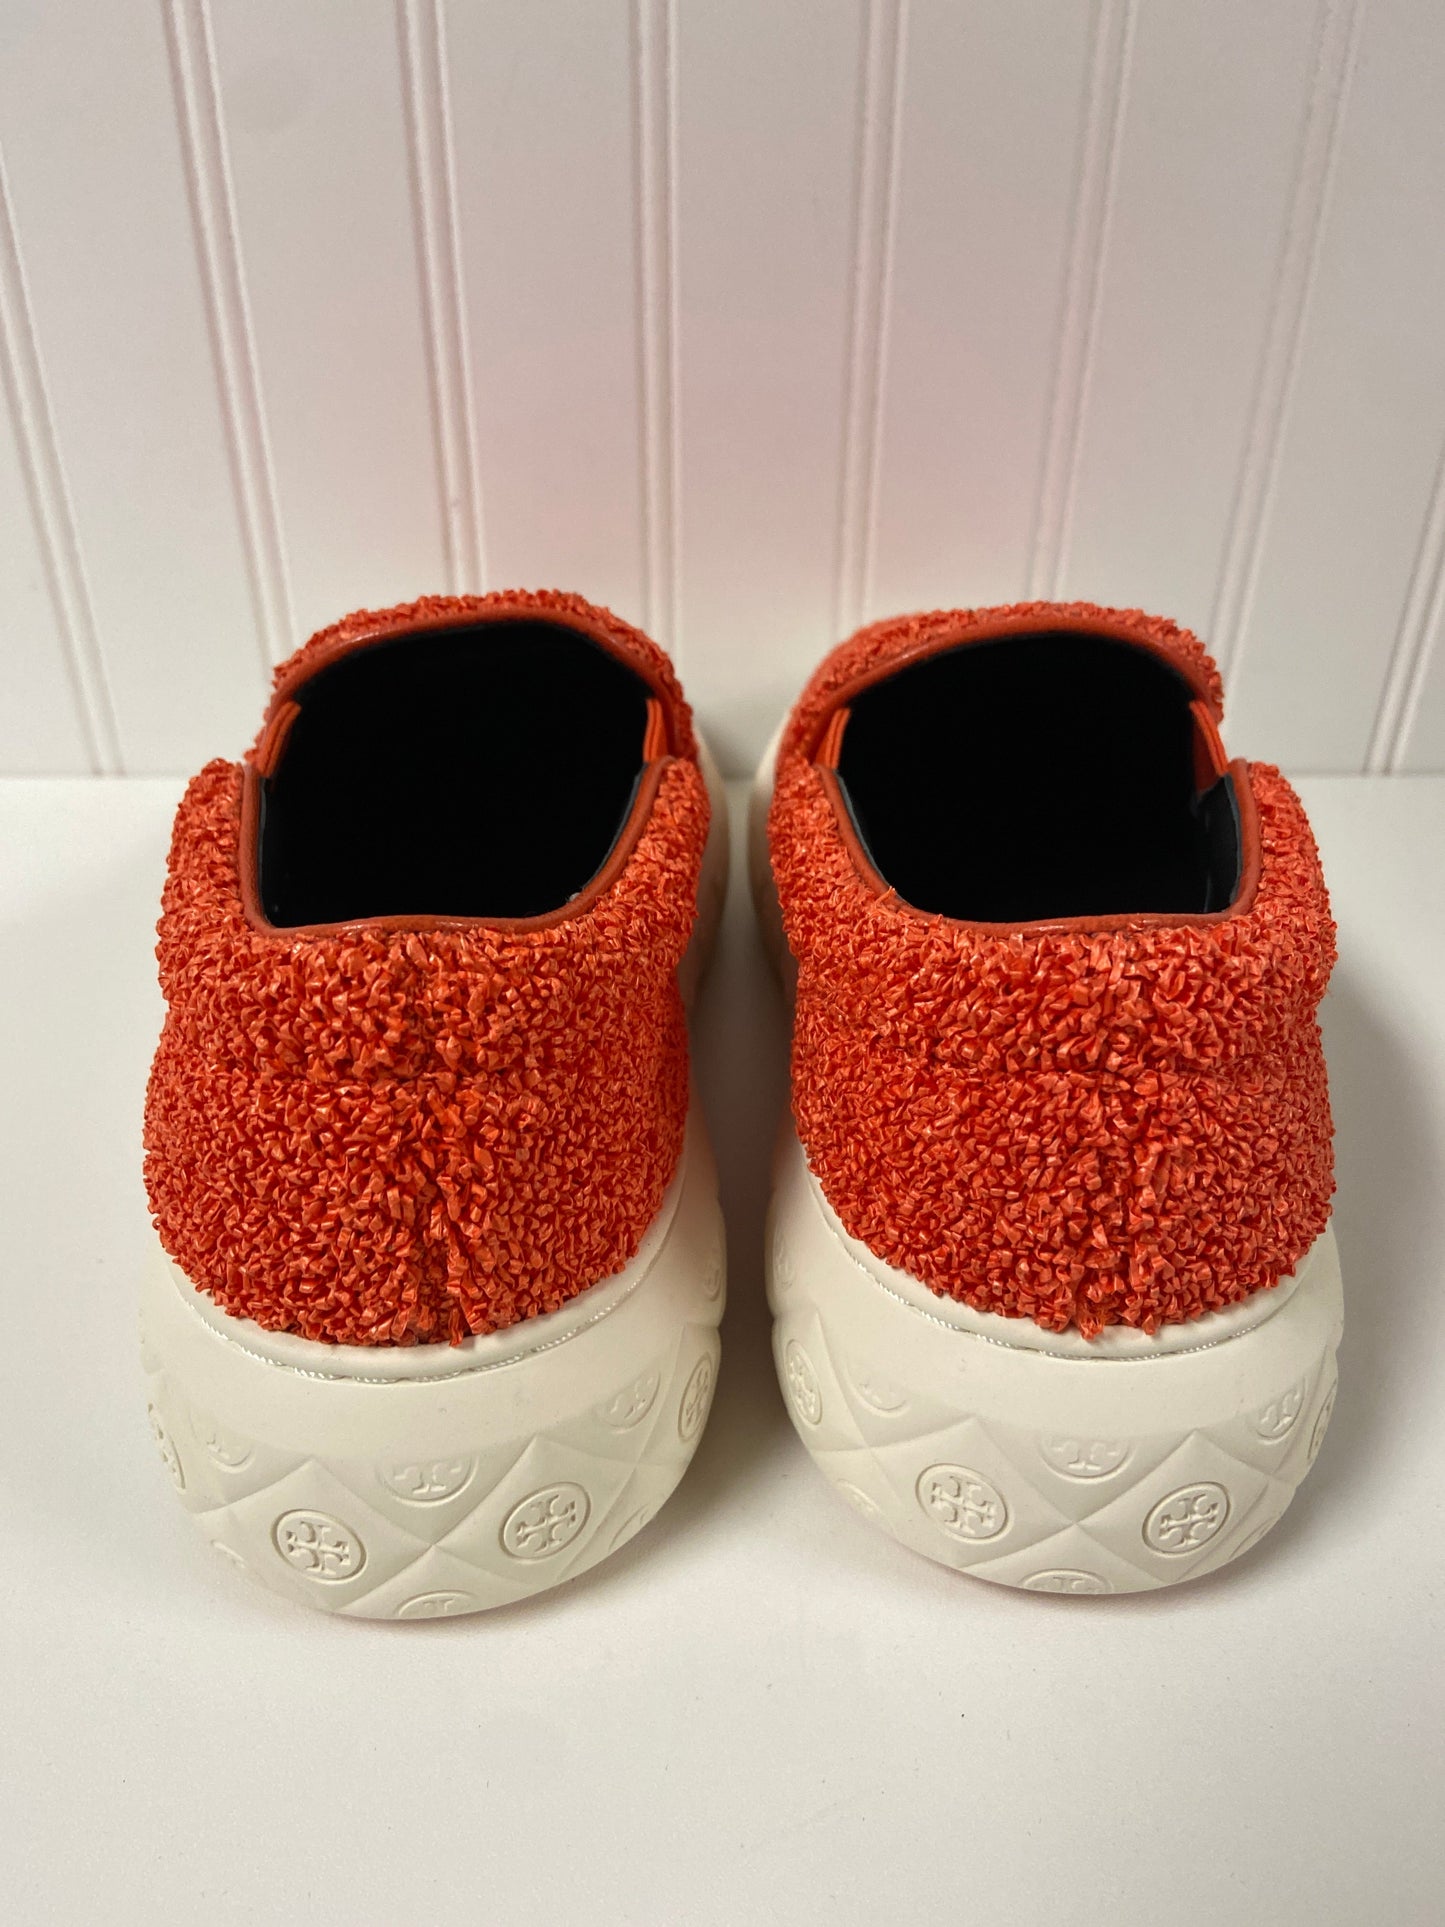 Red Shoes Designer Tory Burch, Size 6